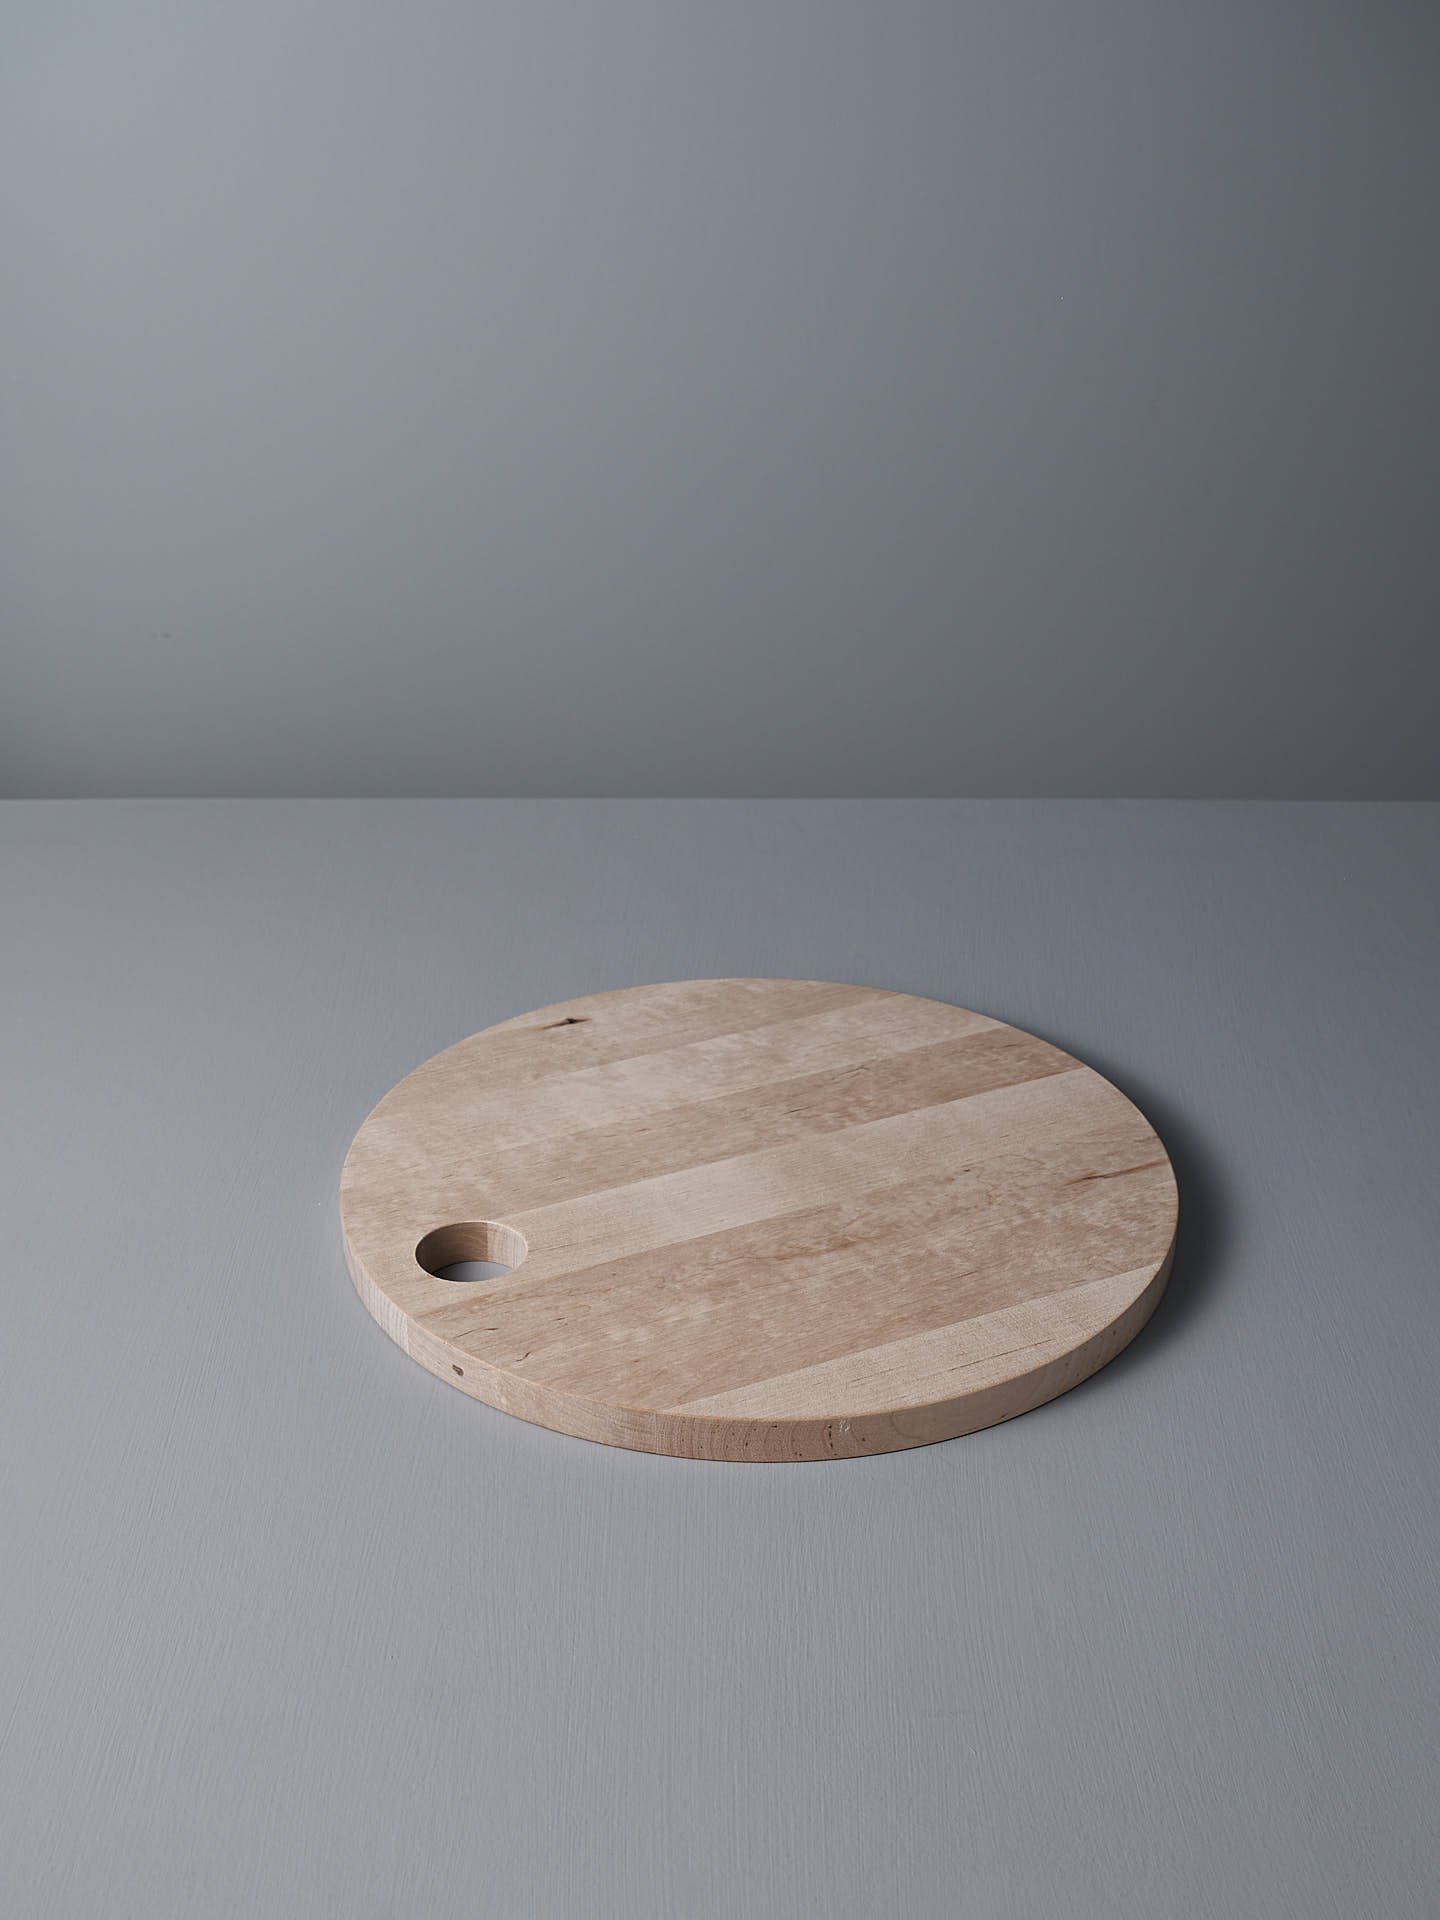 The Iris Hantverk Birch Chopping Board – Round, treated with food-grade oil for durability and featuring a small hole near the edge, rests on a gray surface against a matching gray background.